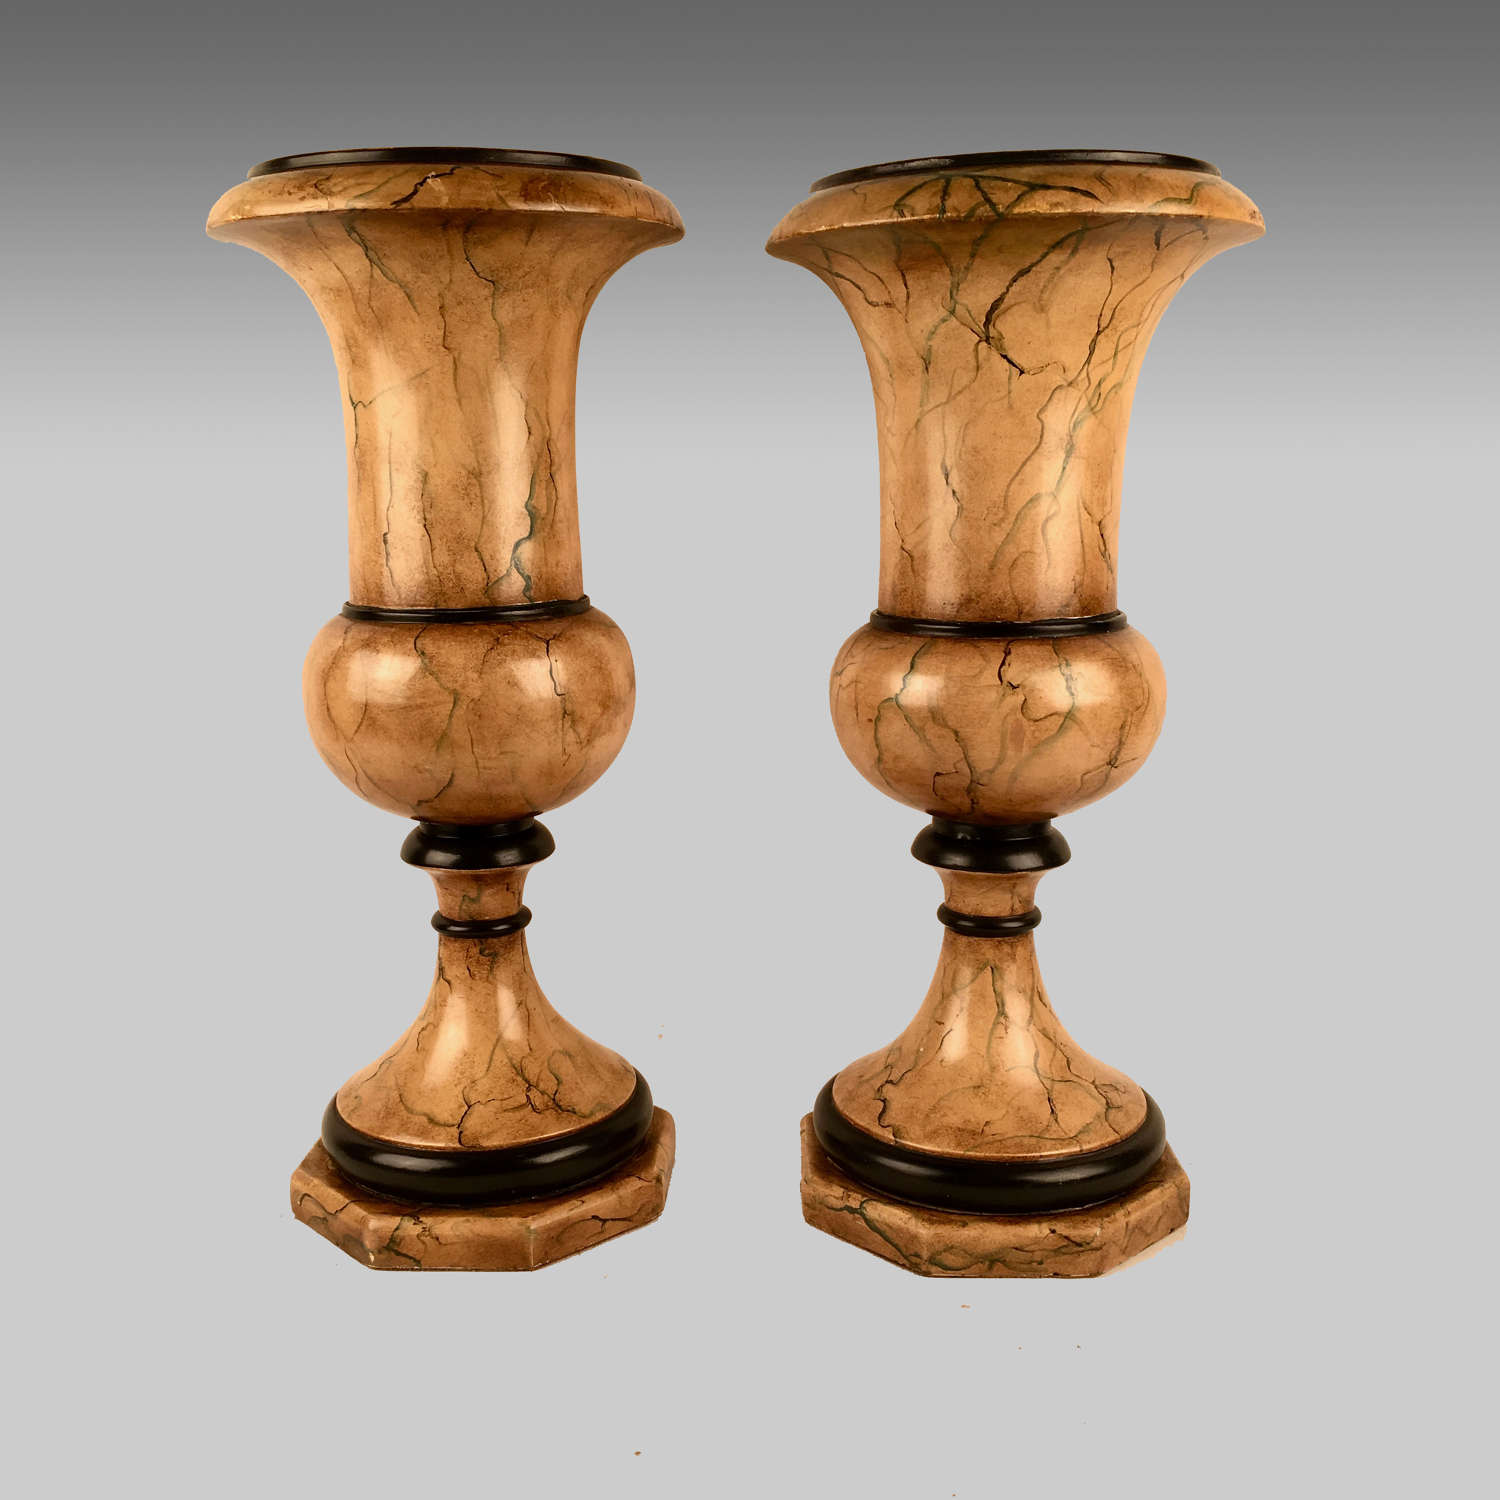 Pair of faux Sienna marble classical urns